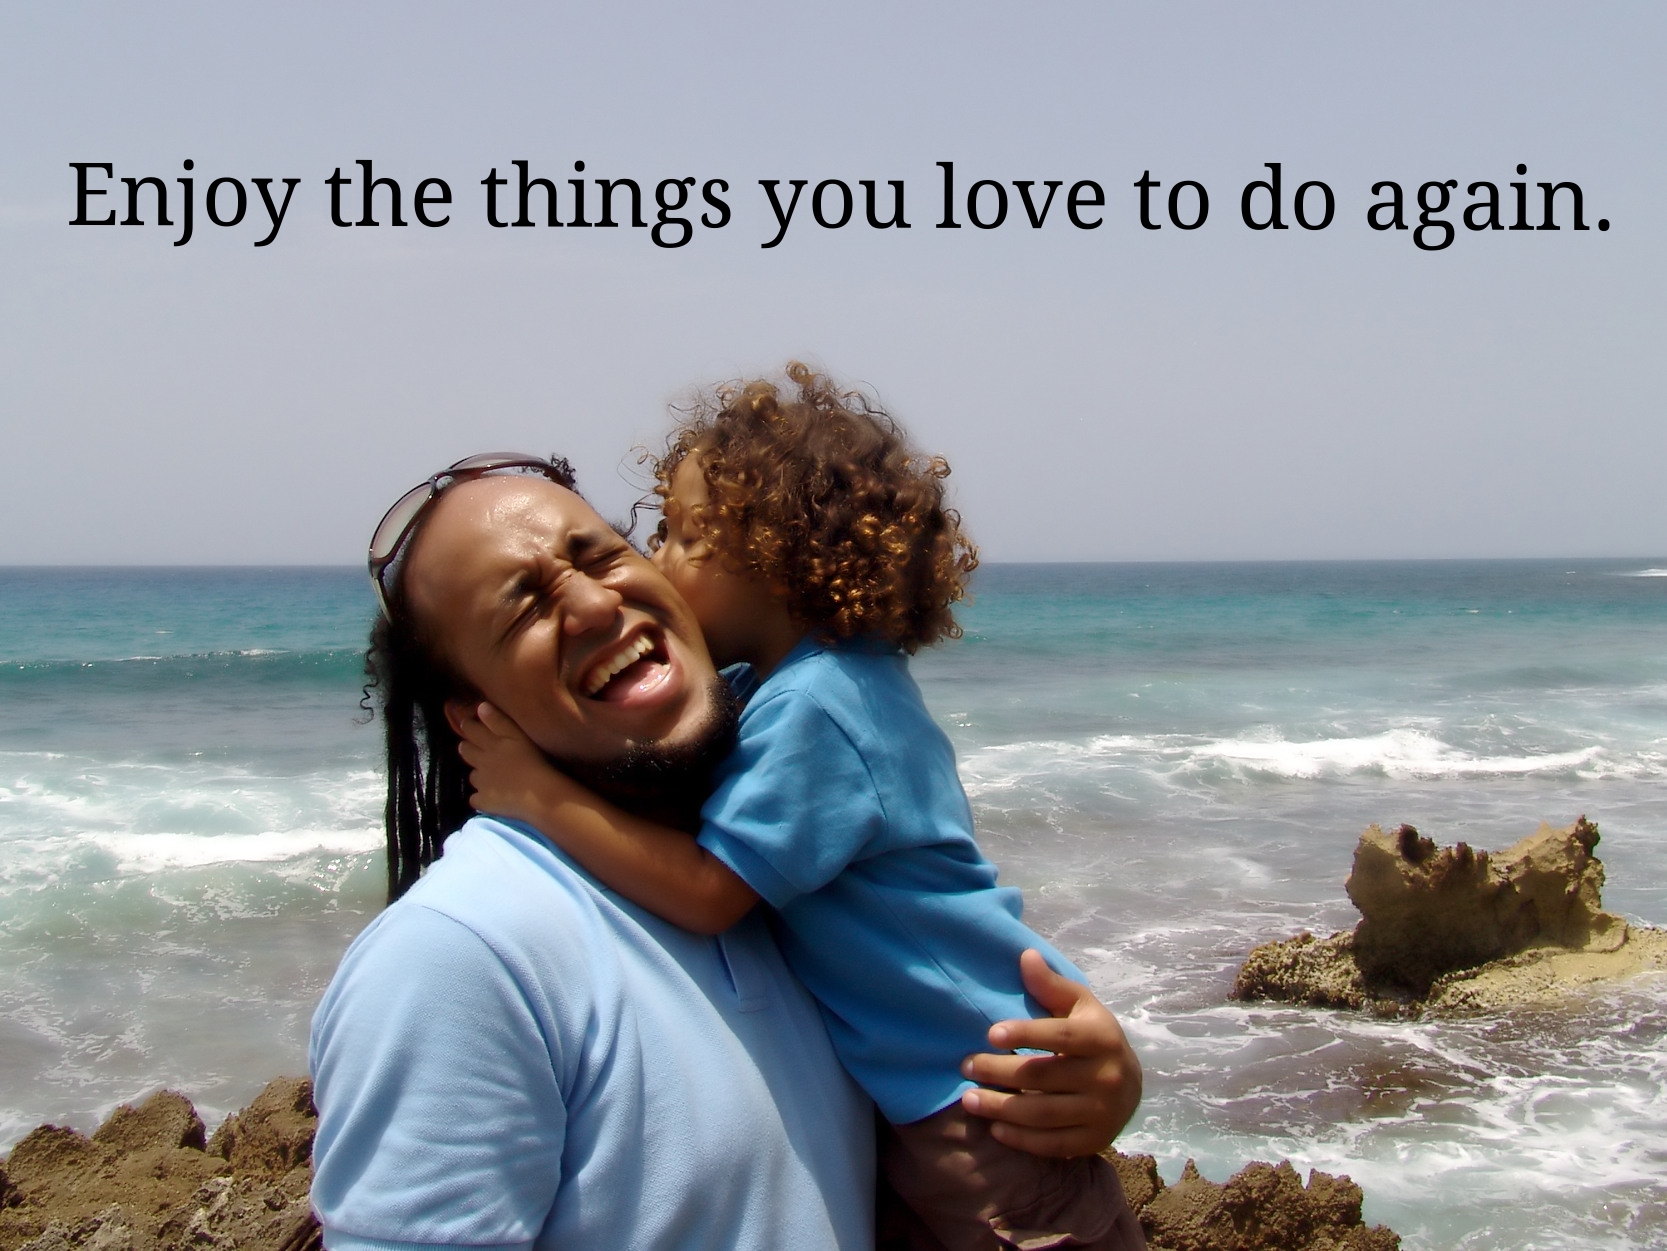 Enjoy the things you love to do again (A dad holds his son on the beach).